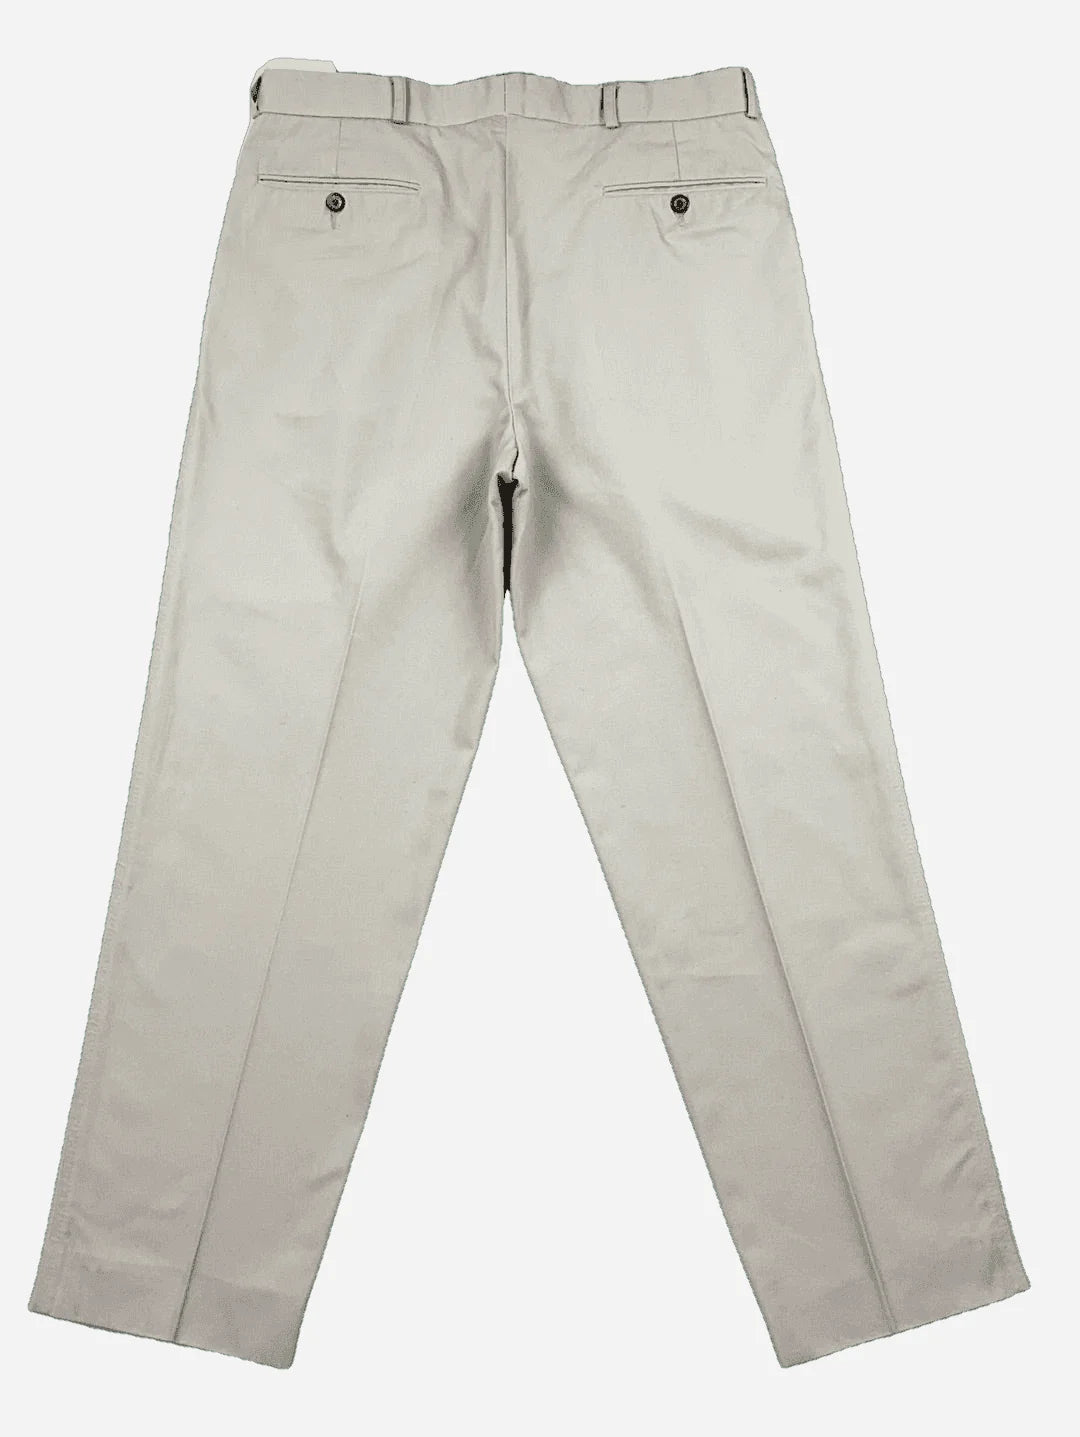 Royal Navy trousers 36/30 (M)